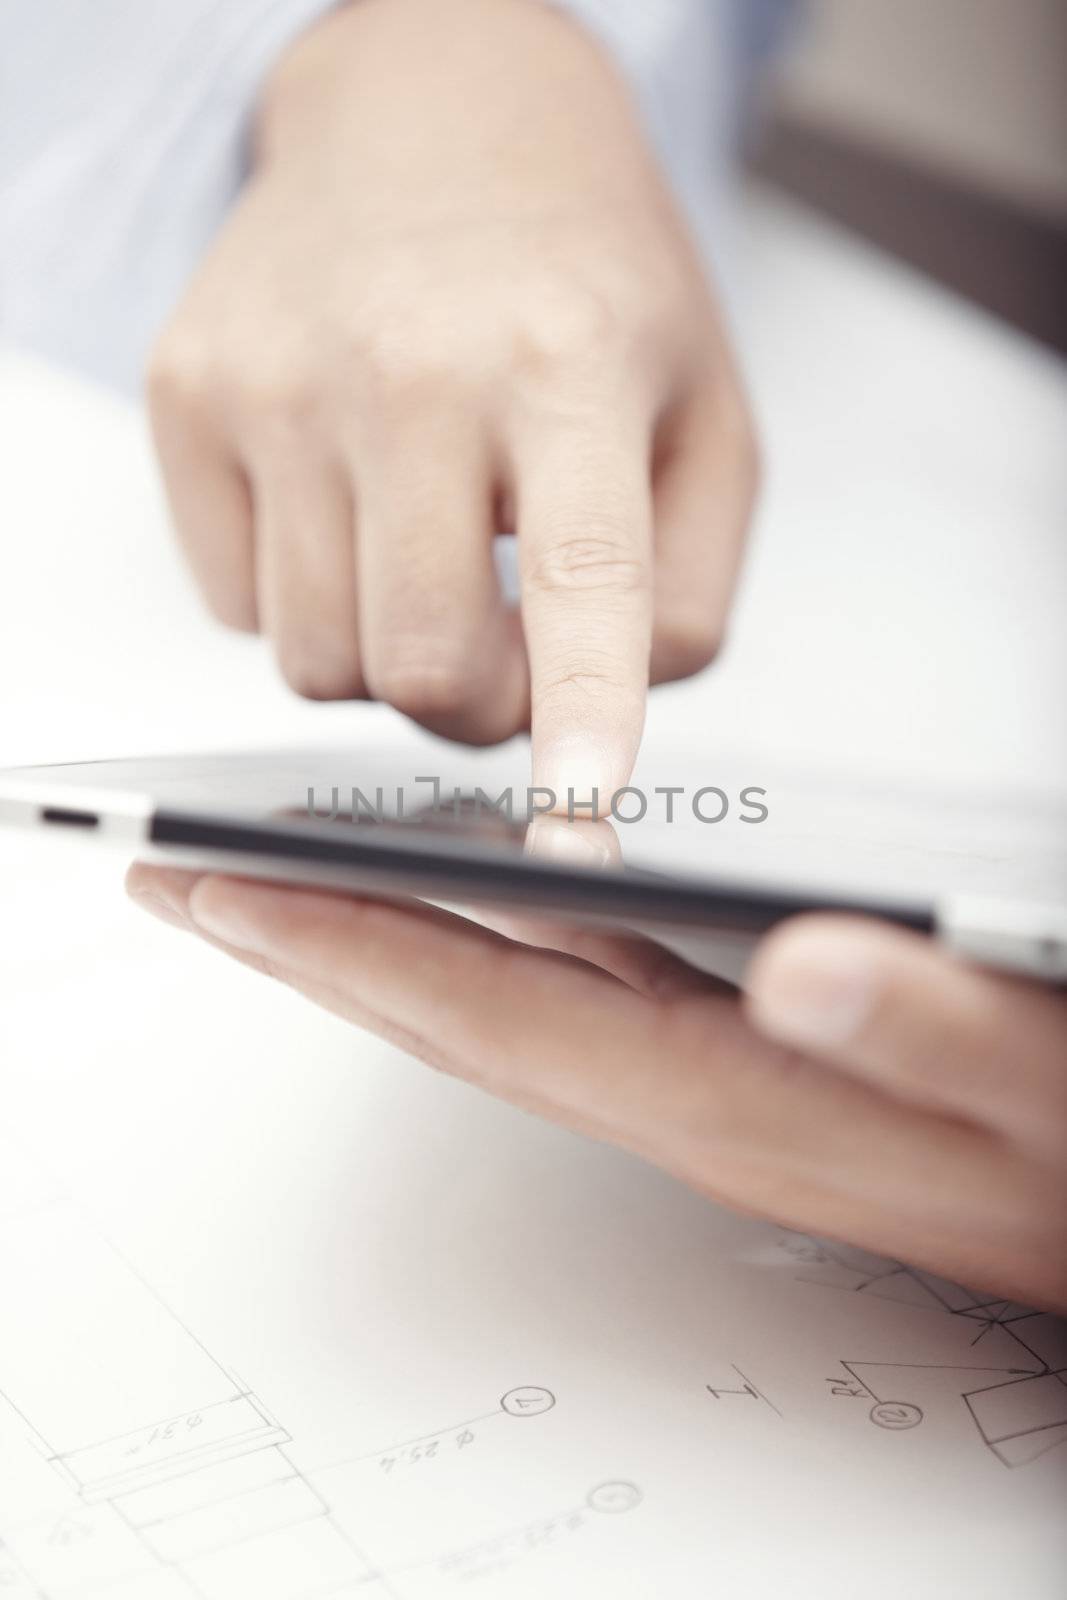 Hands of businessman using tablet PC at office